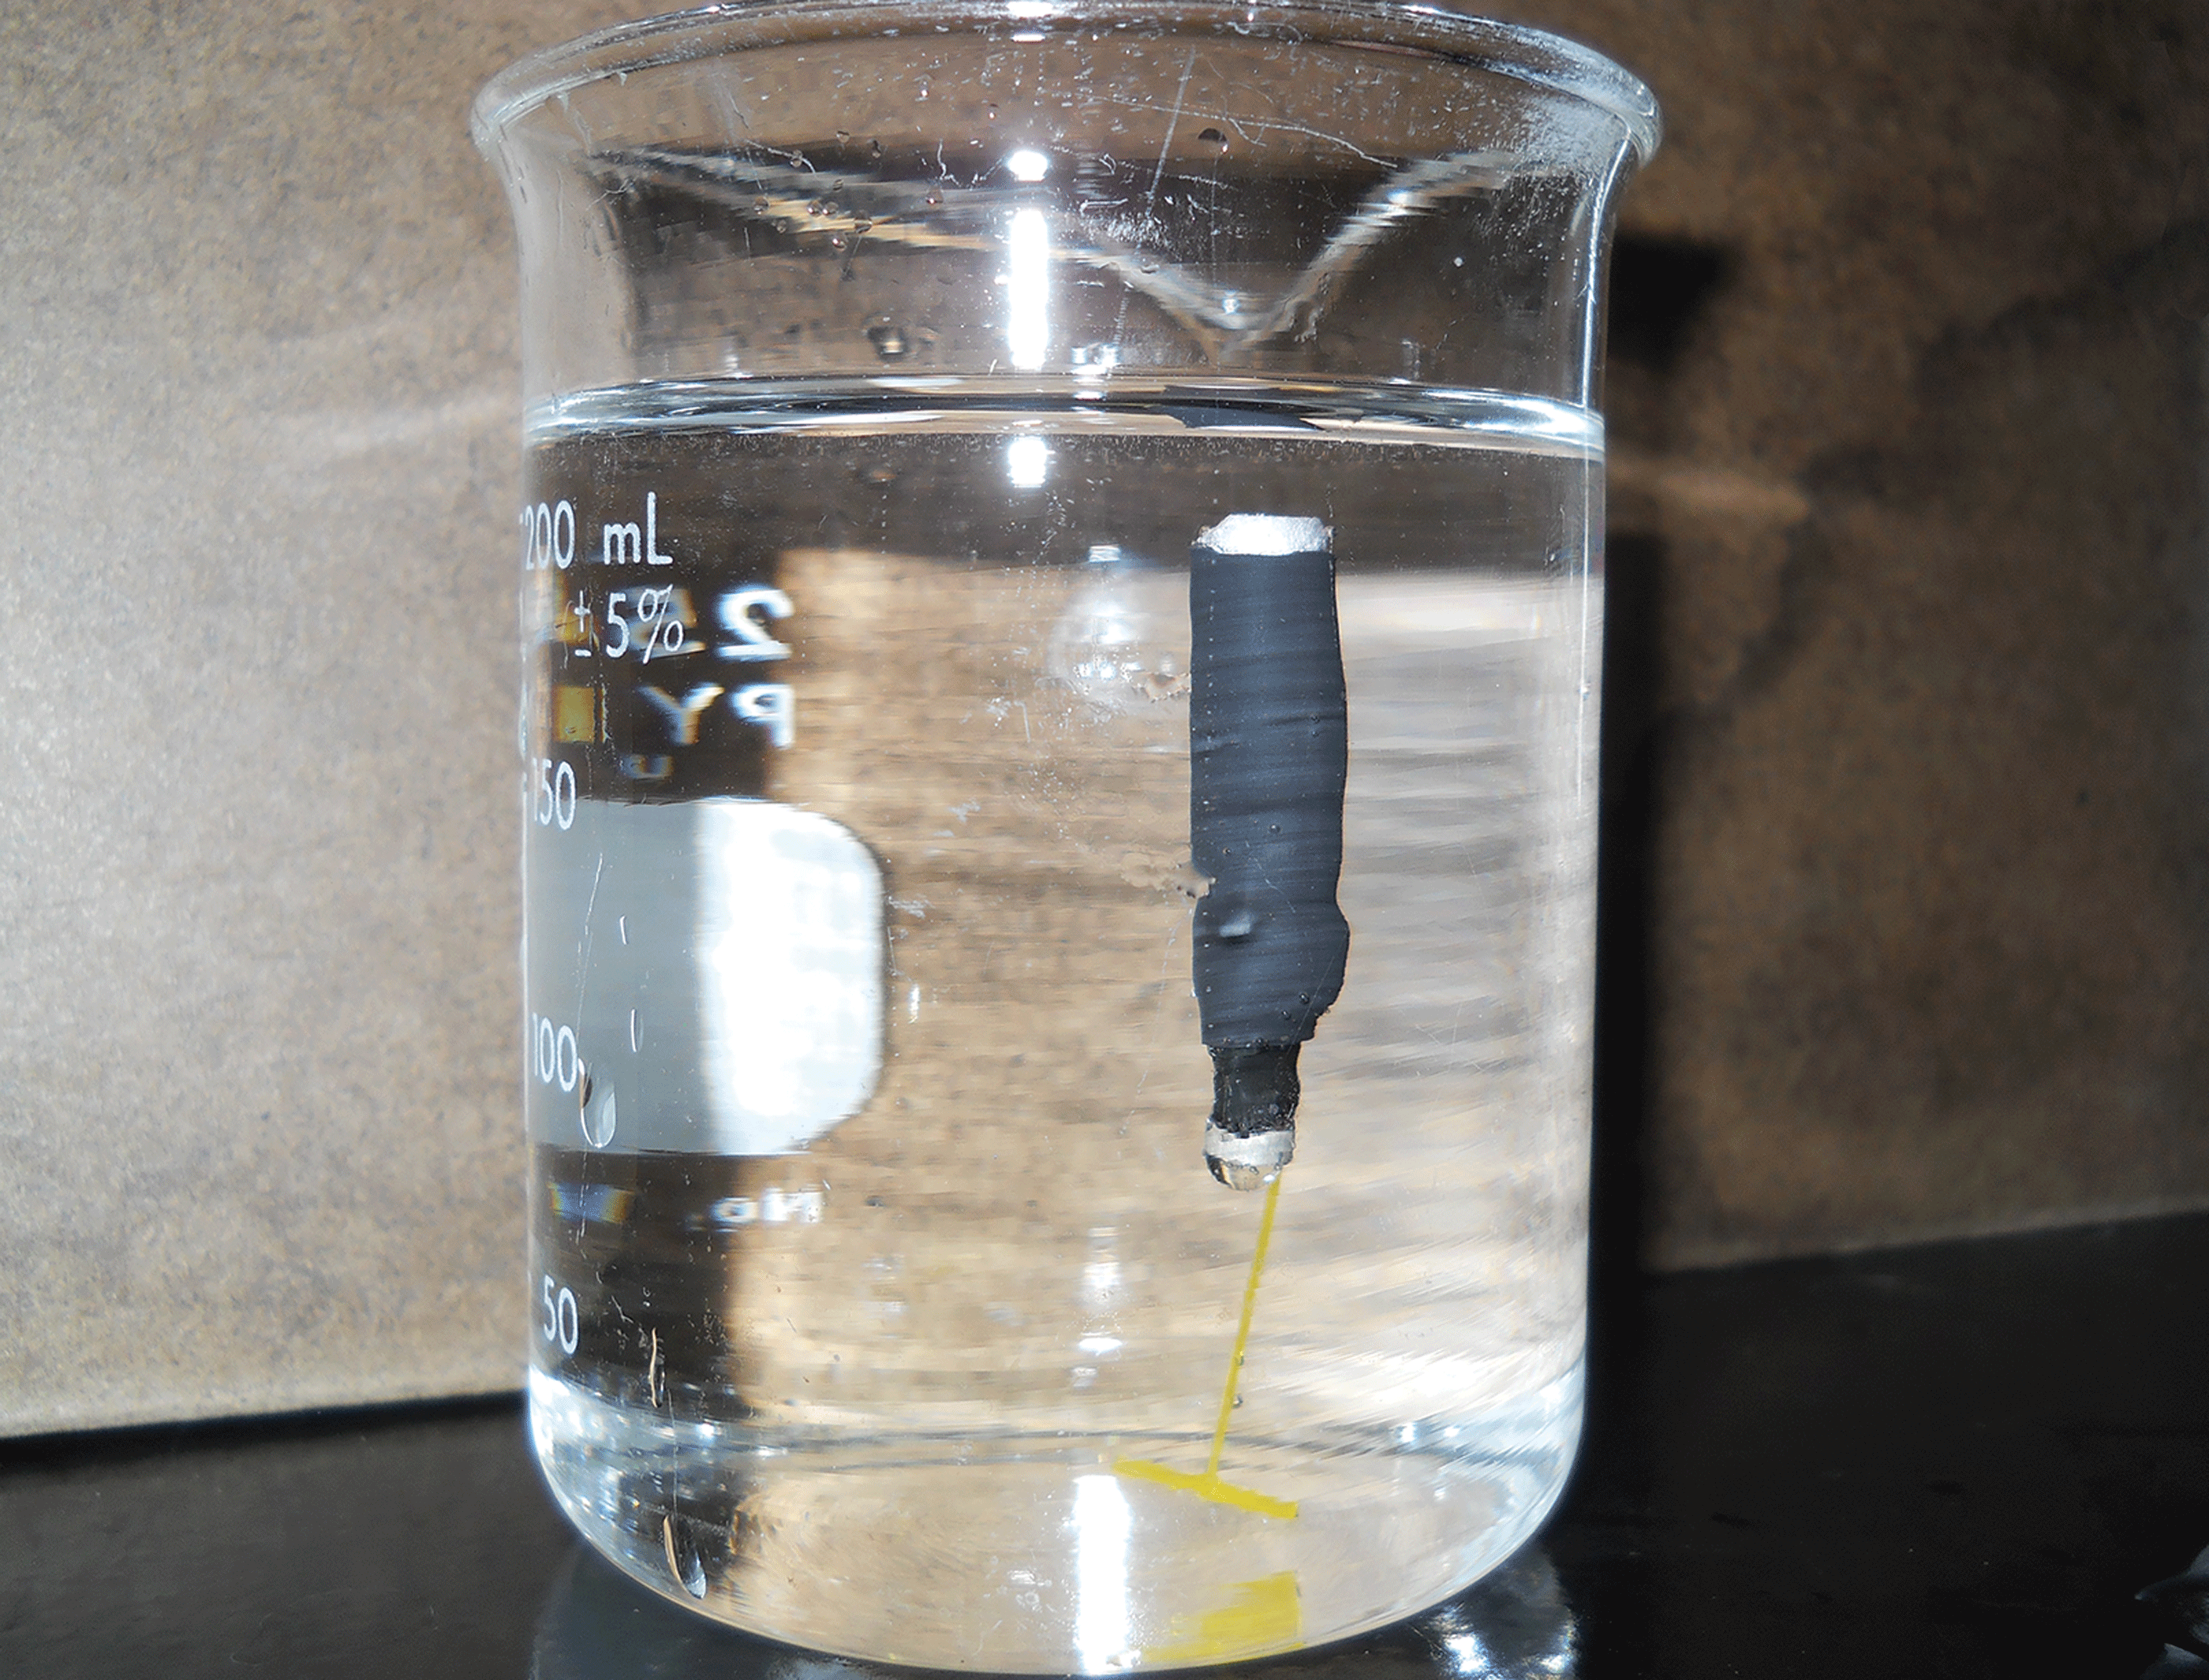 Photograph shows a neutrally buoyant external acoustic transmitter attachment device
                        upright in a beaker full of water.